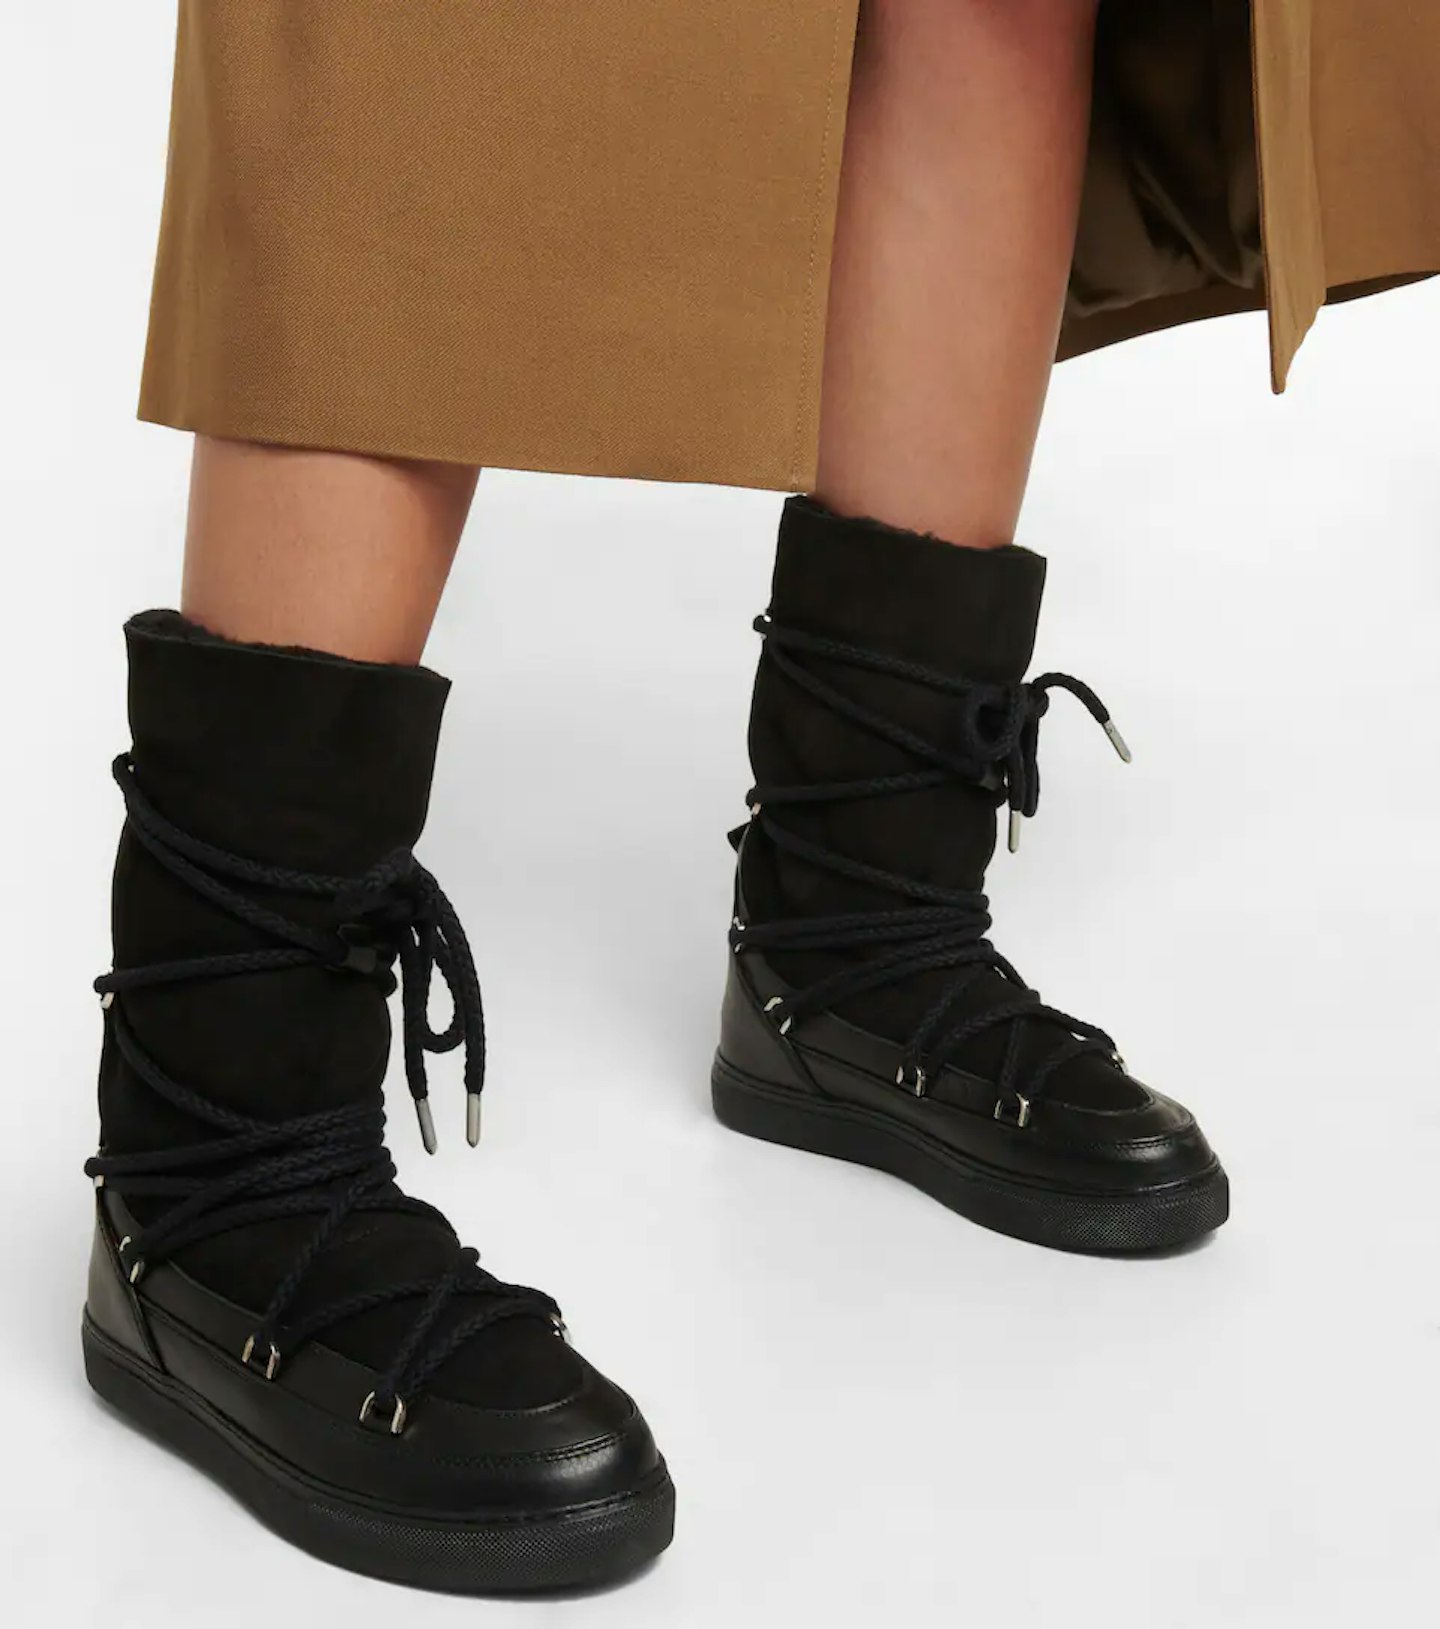 INUIKII, Shearling-lined Snow Boots